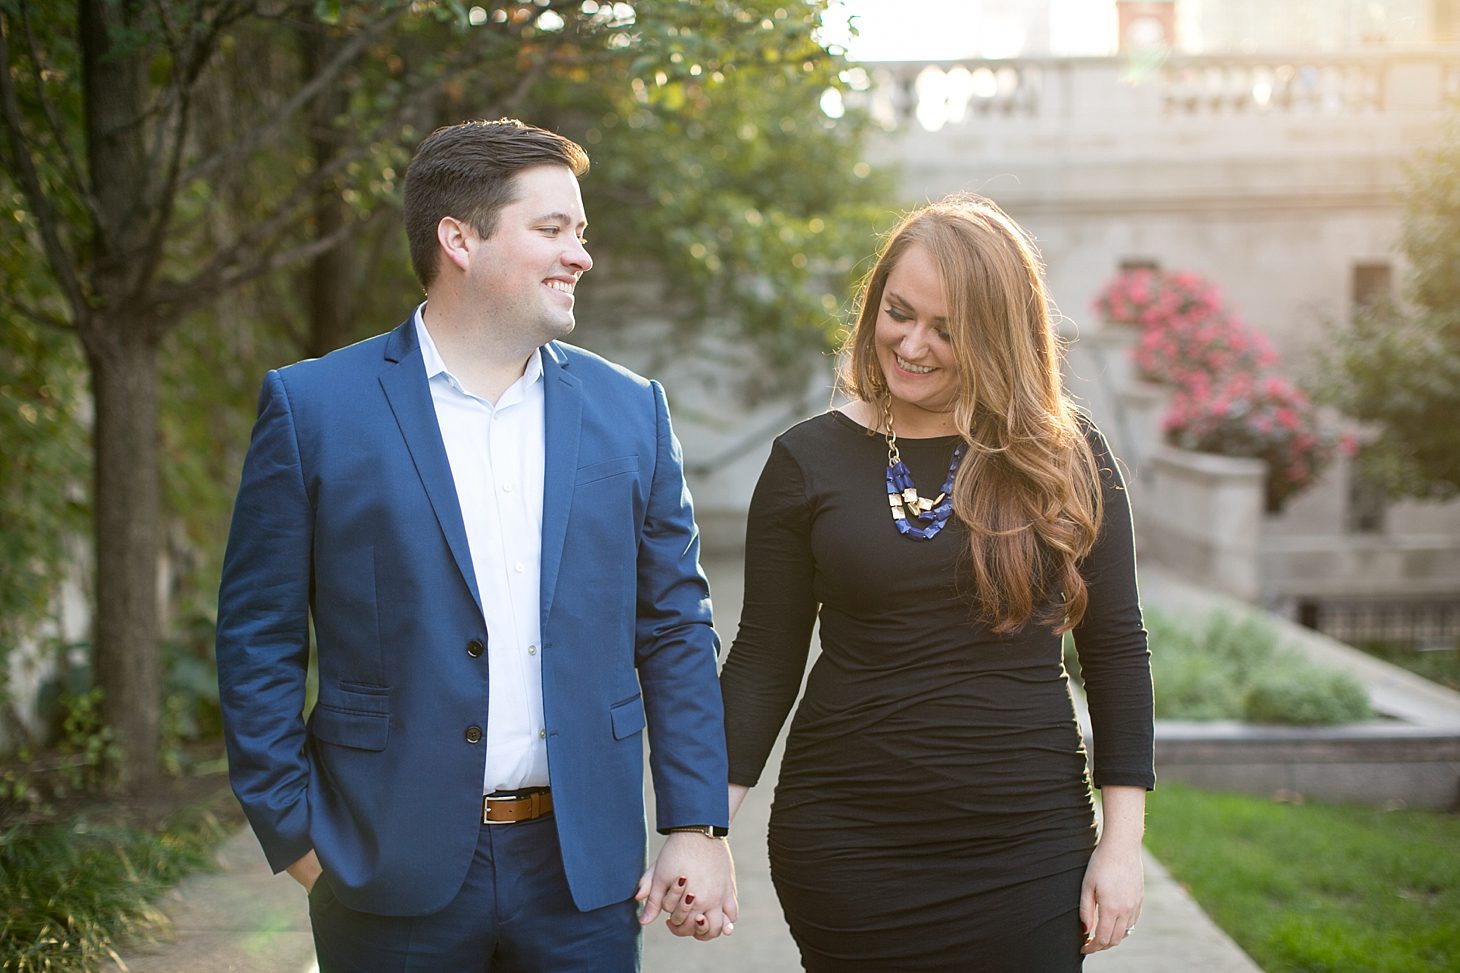 olive-park-engagement-photos-by-christy-tyler-photography_0004